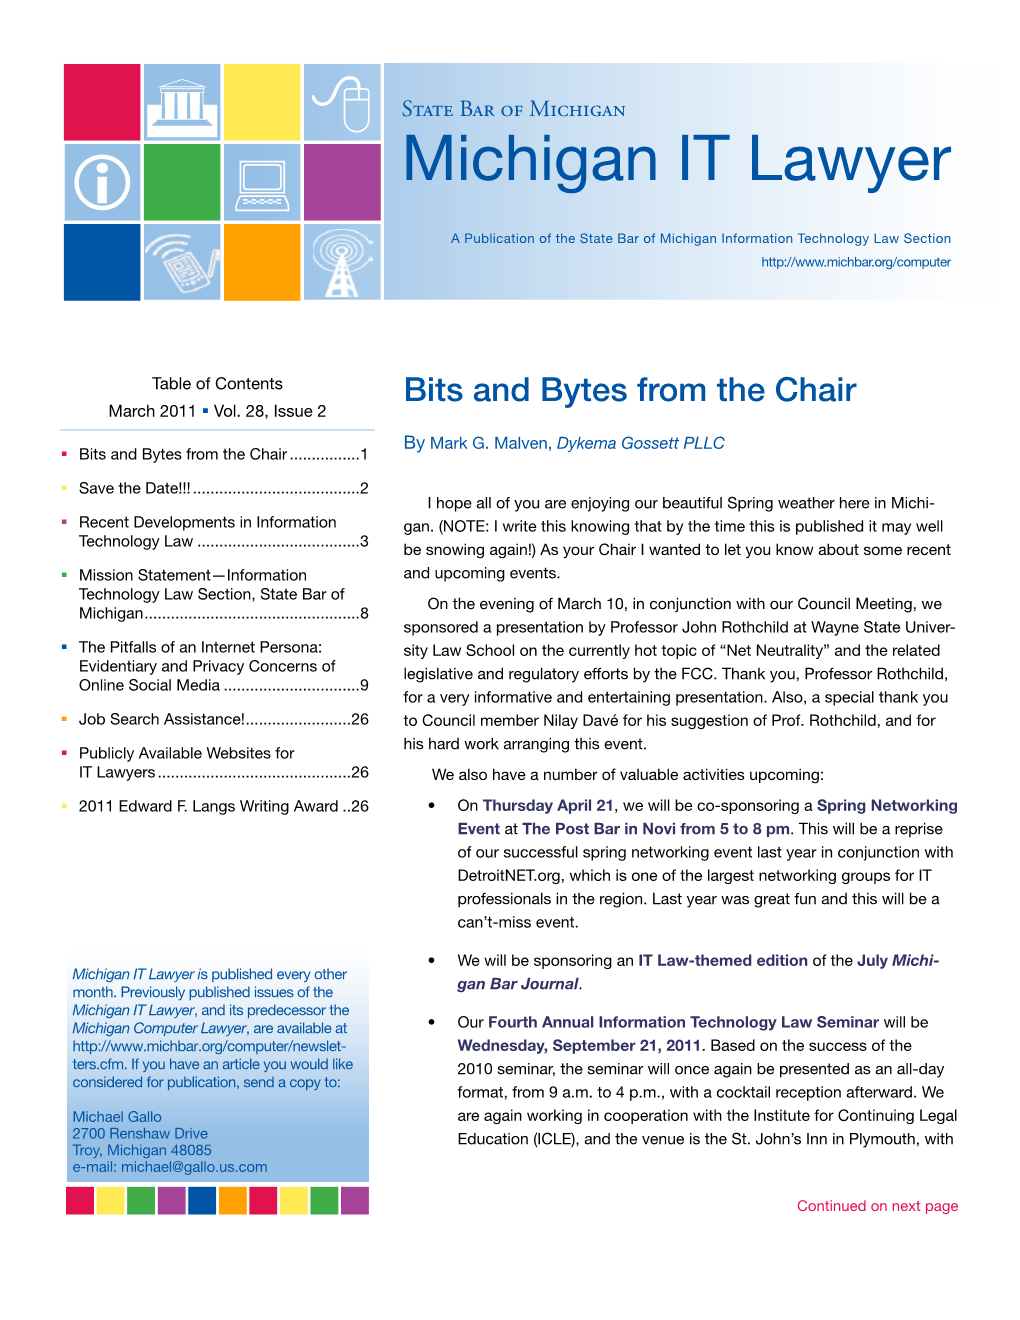 Michigan IT Lawyer a Publication of the State Bar of Michigan Information Technology Law Section